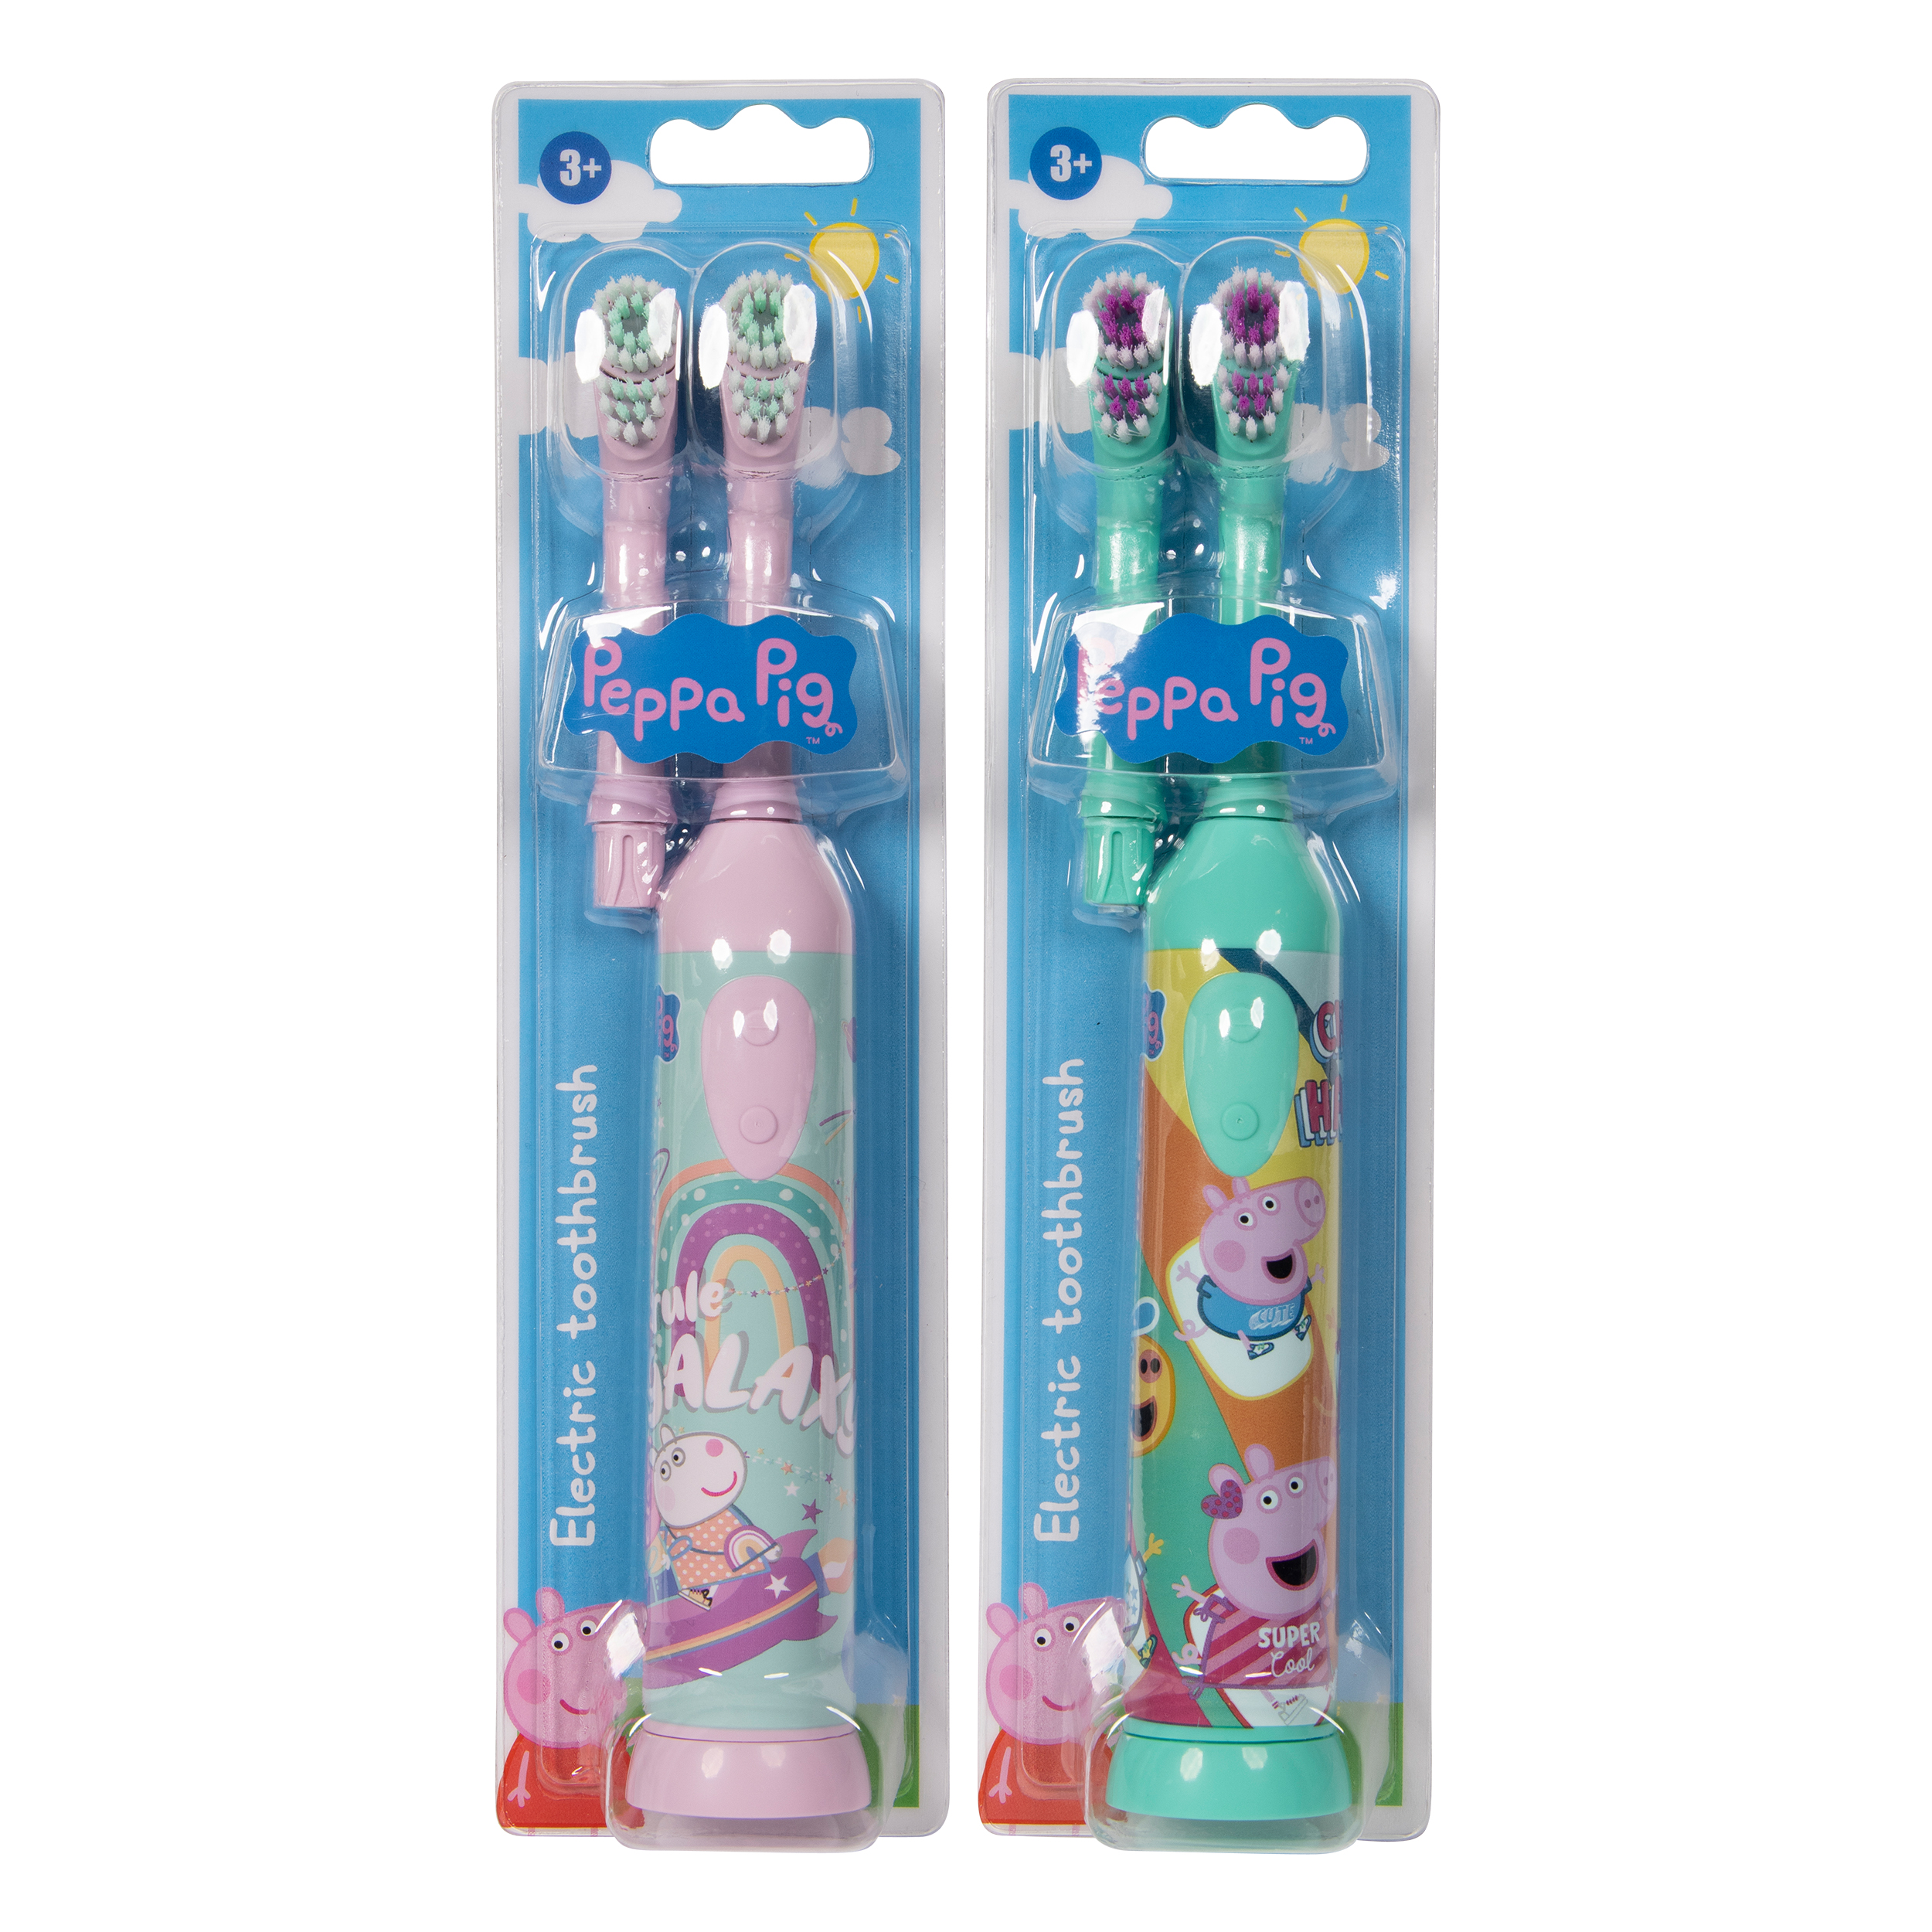 PEPPA PIG PP2 Toothbrush Electric Multicolor